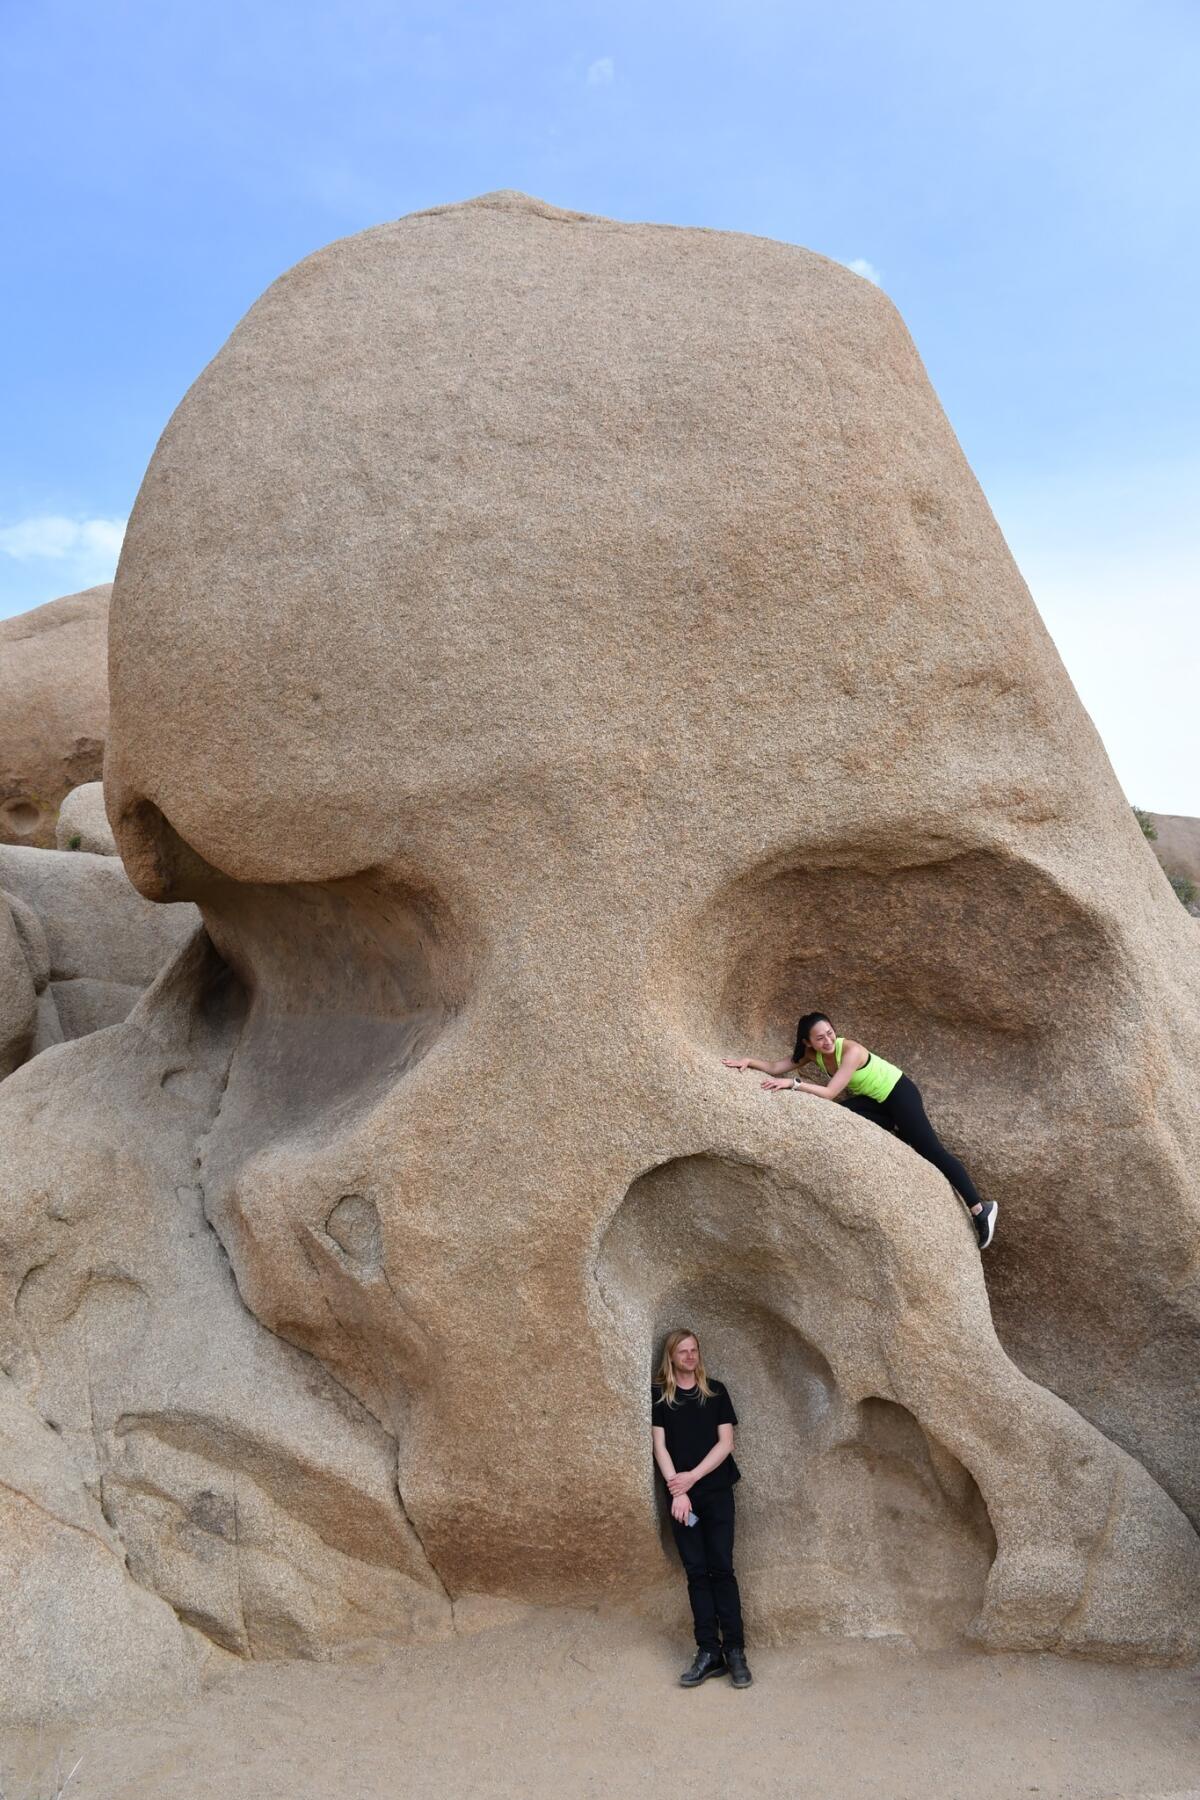 Visitors explore (and pose for photos) at Skull Rock in Joshua Tree National Park.